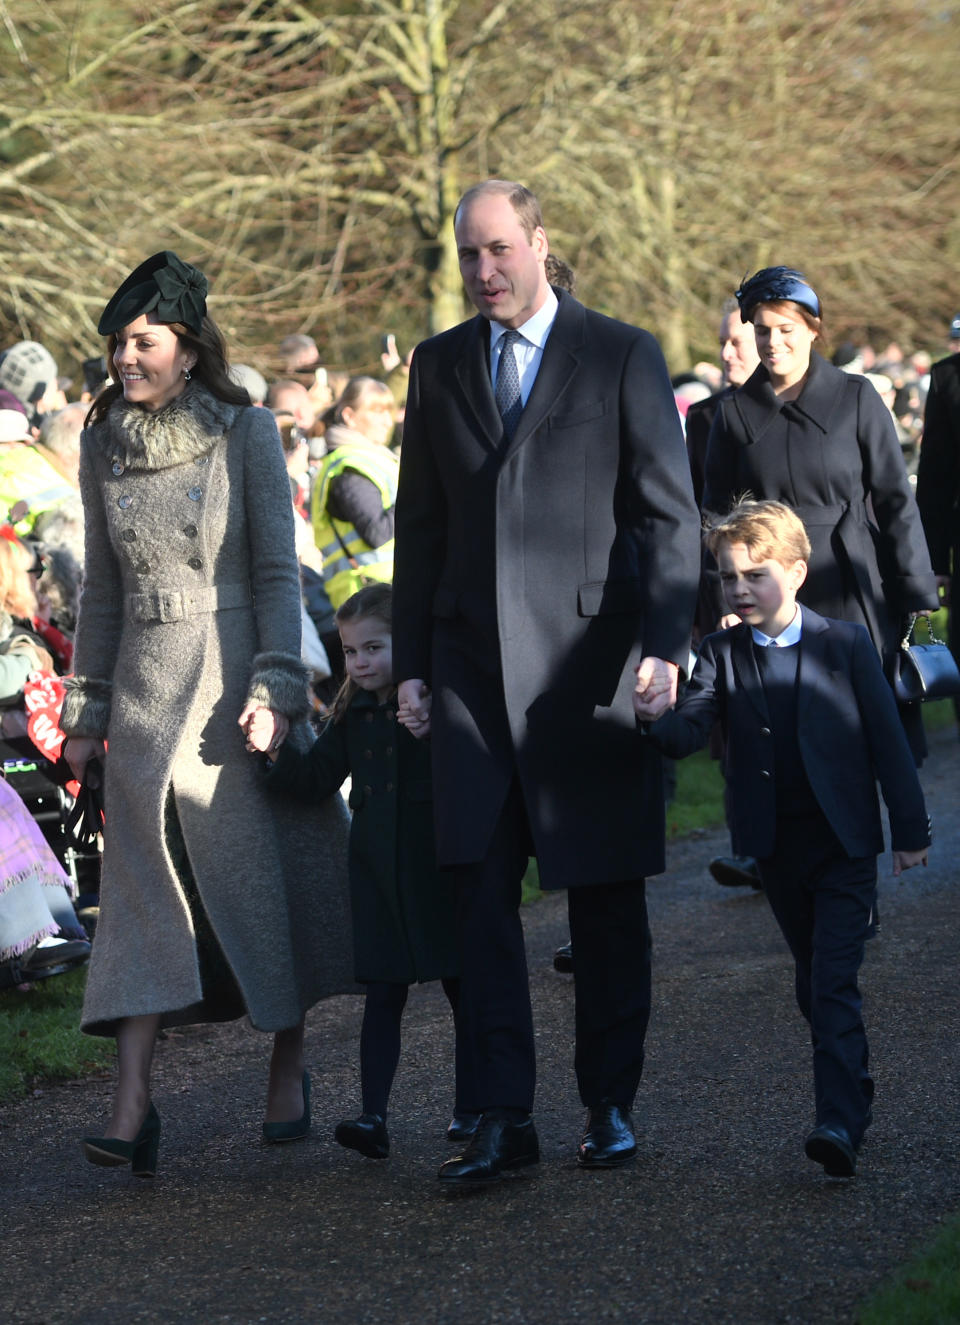 The Duke and Duchess of Cambridge and their children Prince George and Princess Charlotte arriving to attend the Christmas Day morning church service. [Photo: PA]